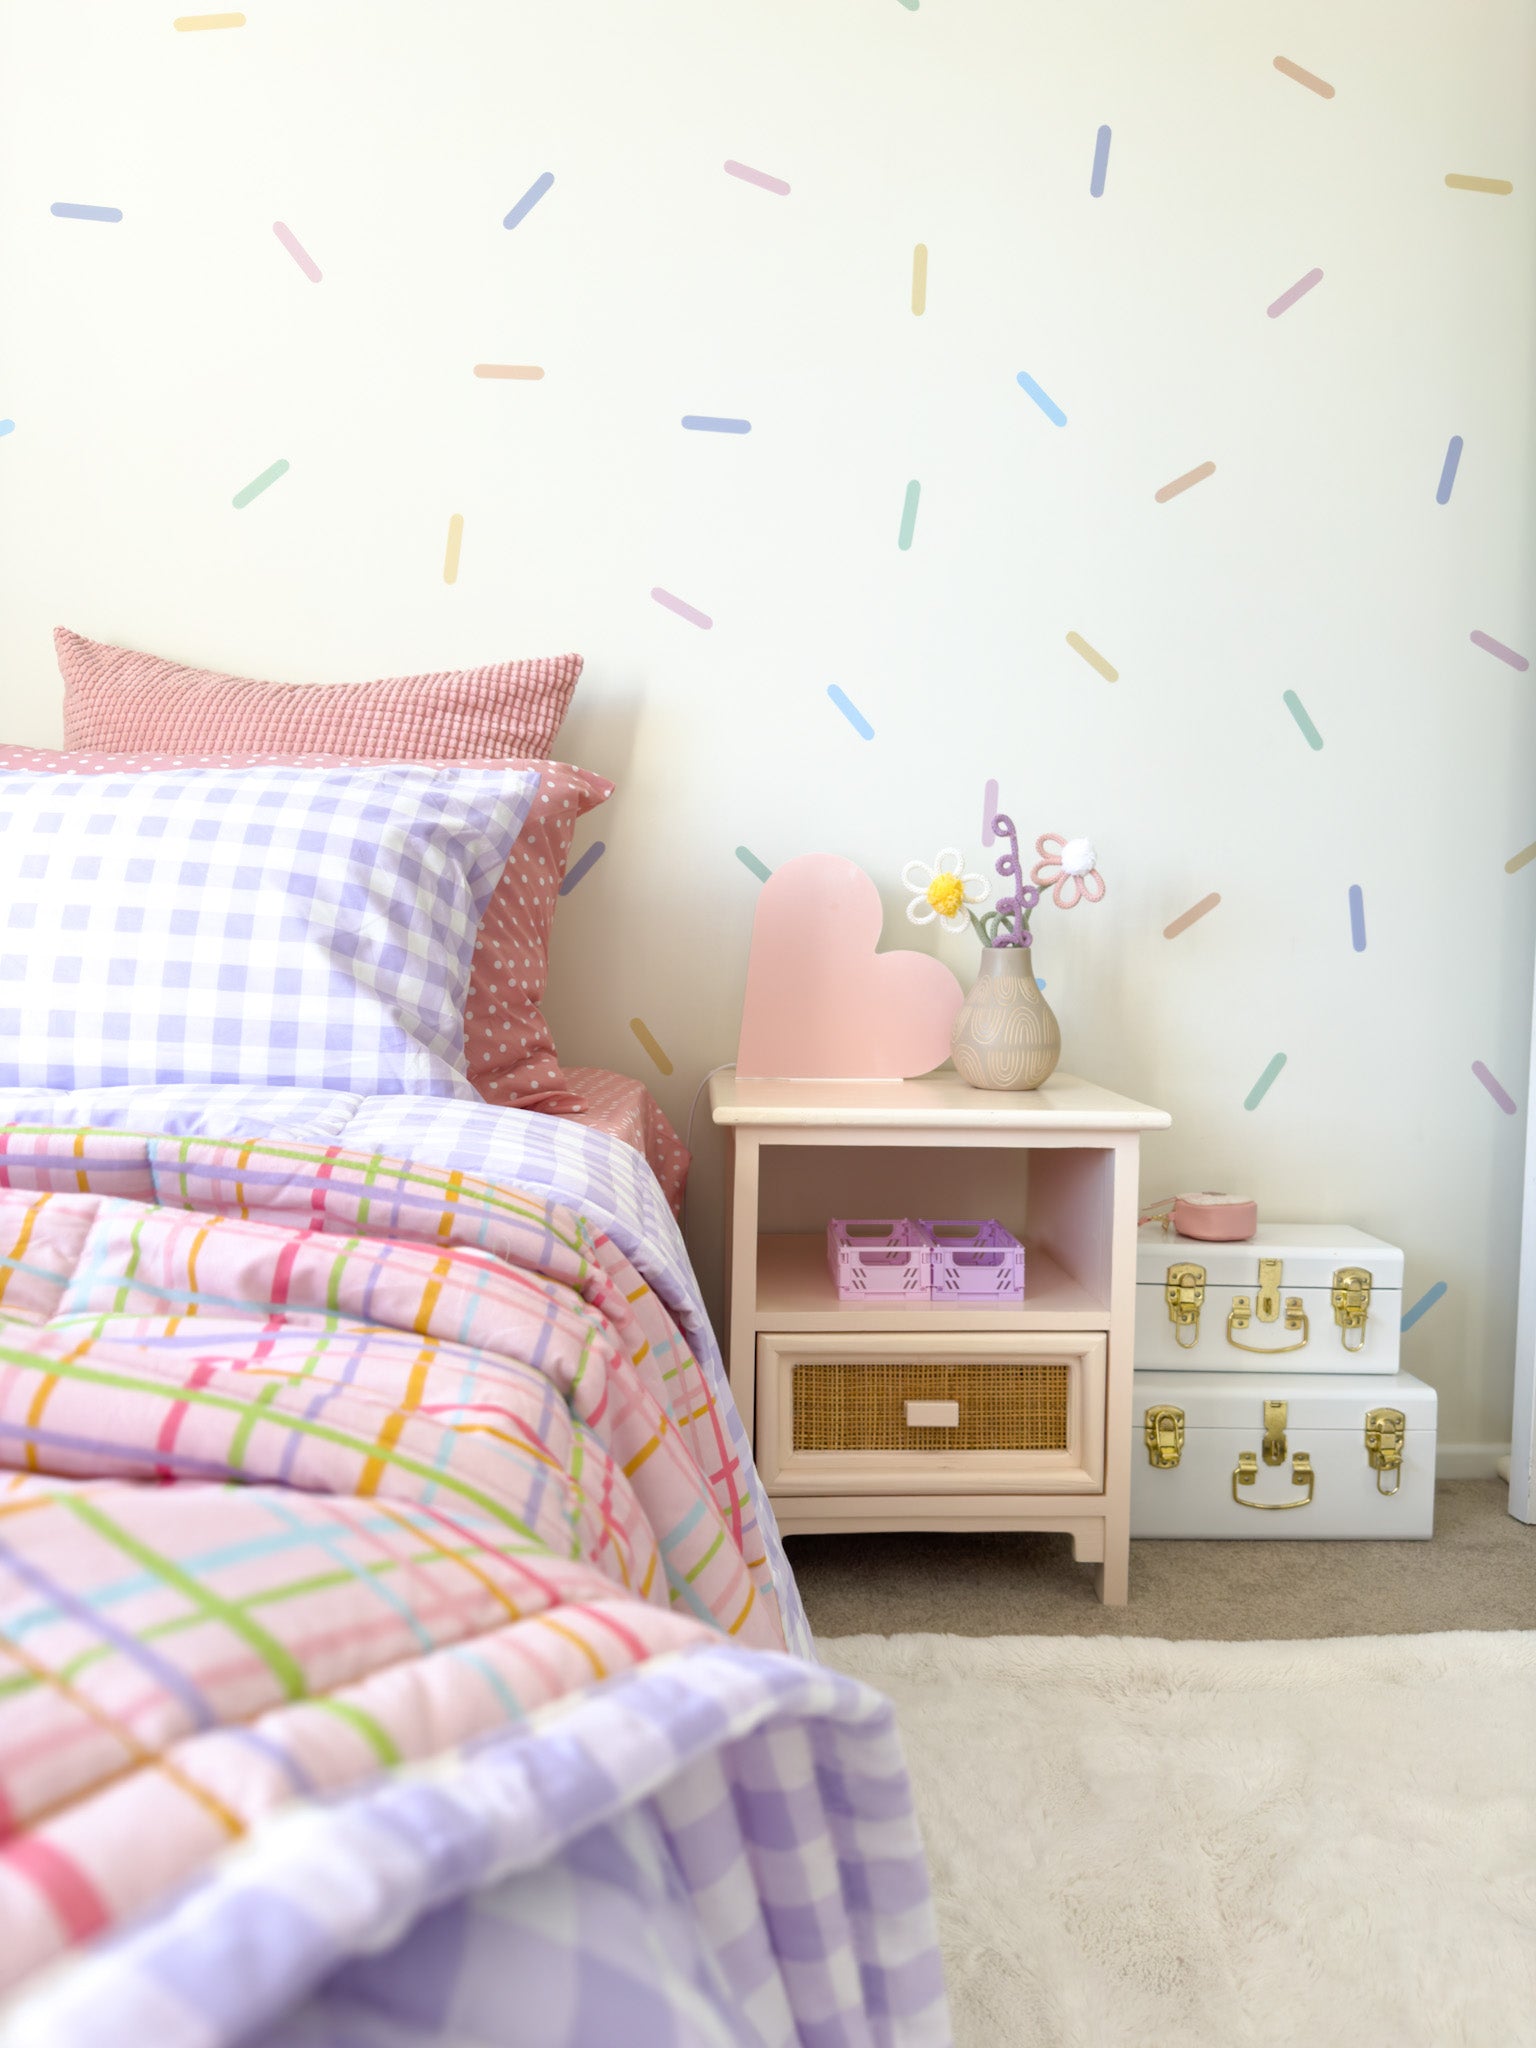 Sprinkles Wall Stickers